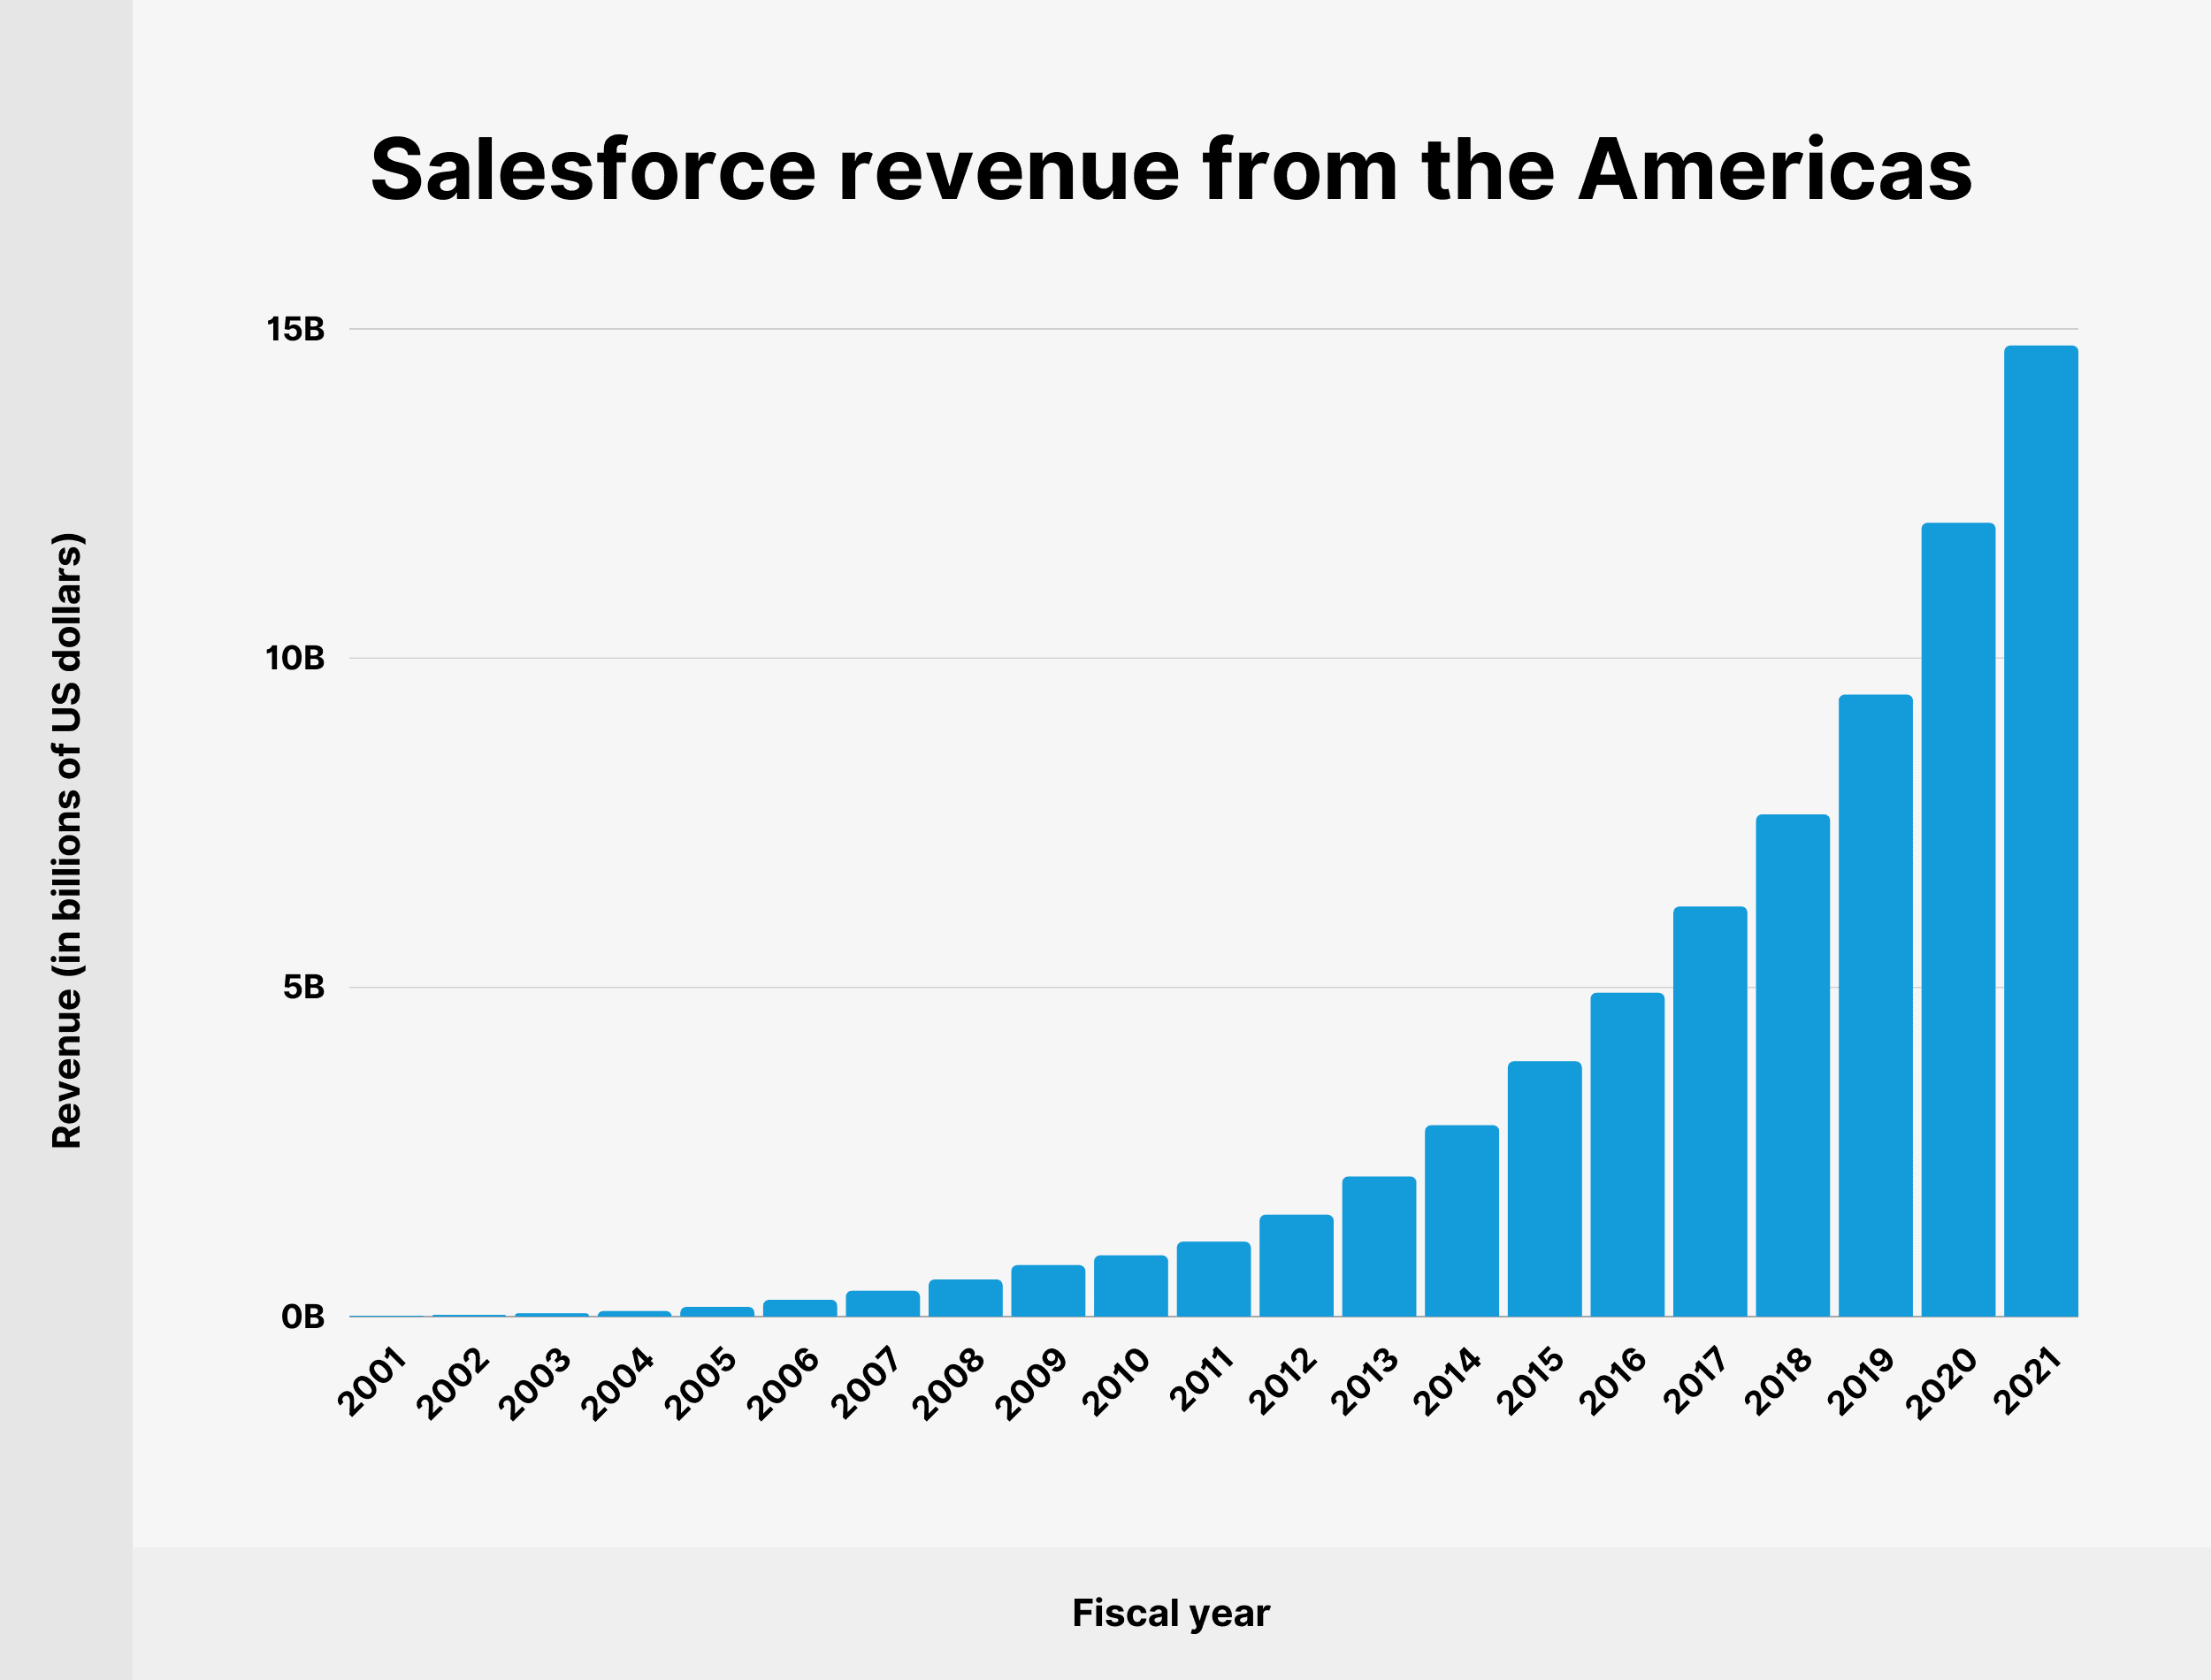 Salesforce revenue from the Americas